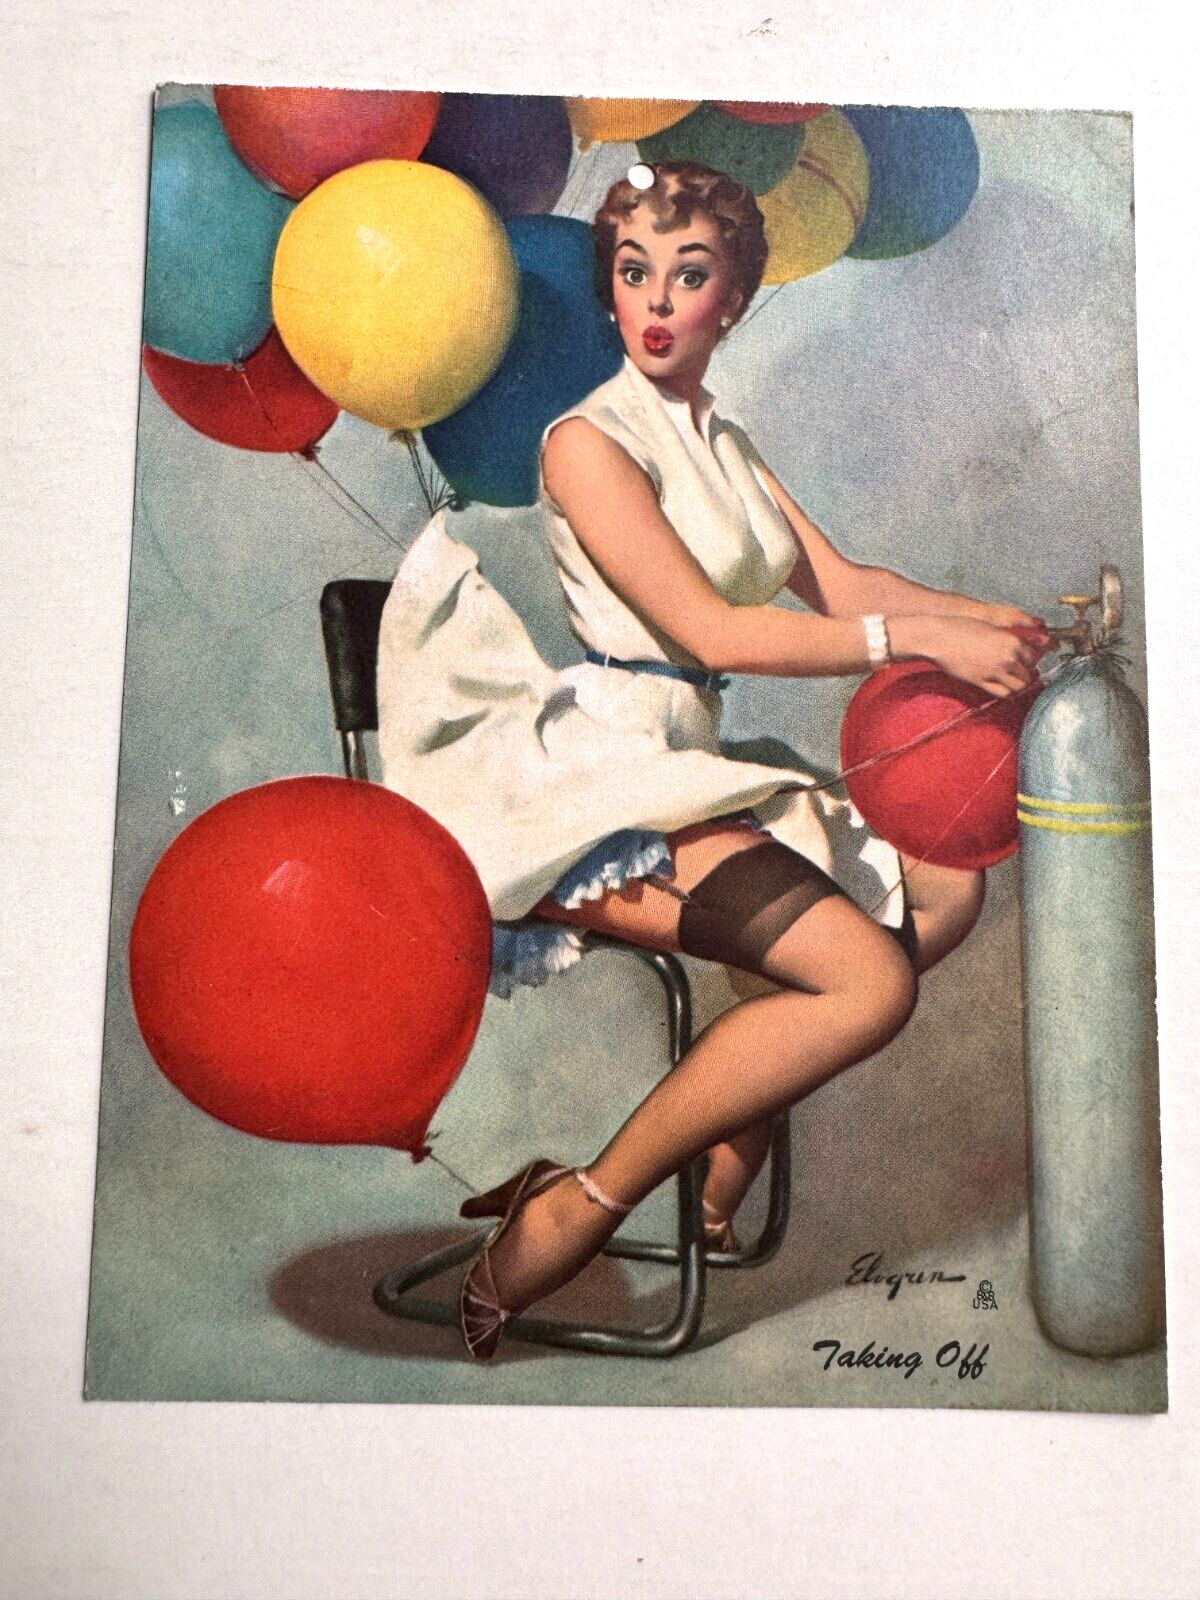 1950's Small Pinup Girl Picture-Blond w/ Balloons- Taking Off by Elvgren